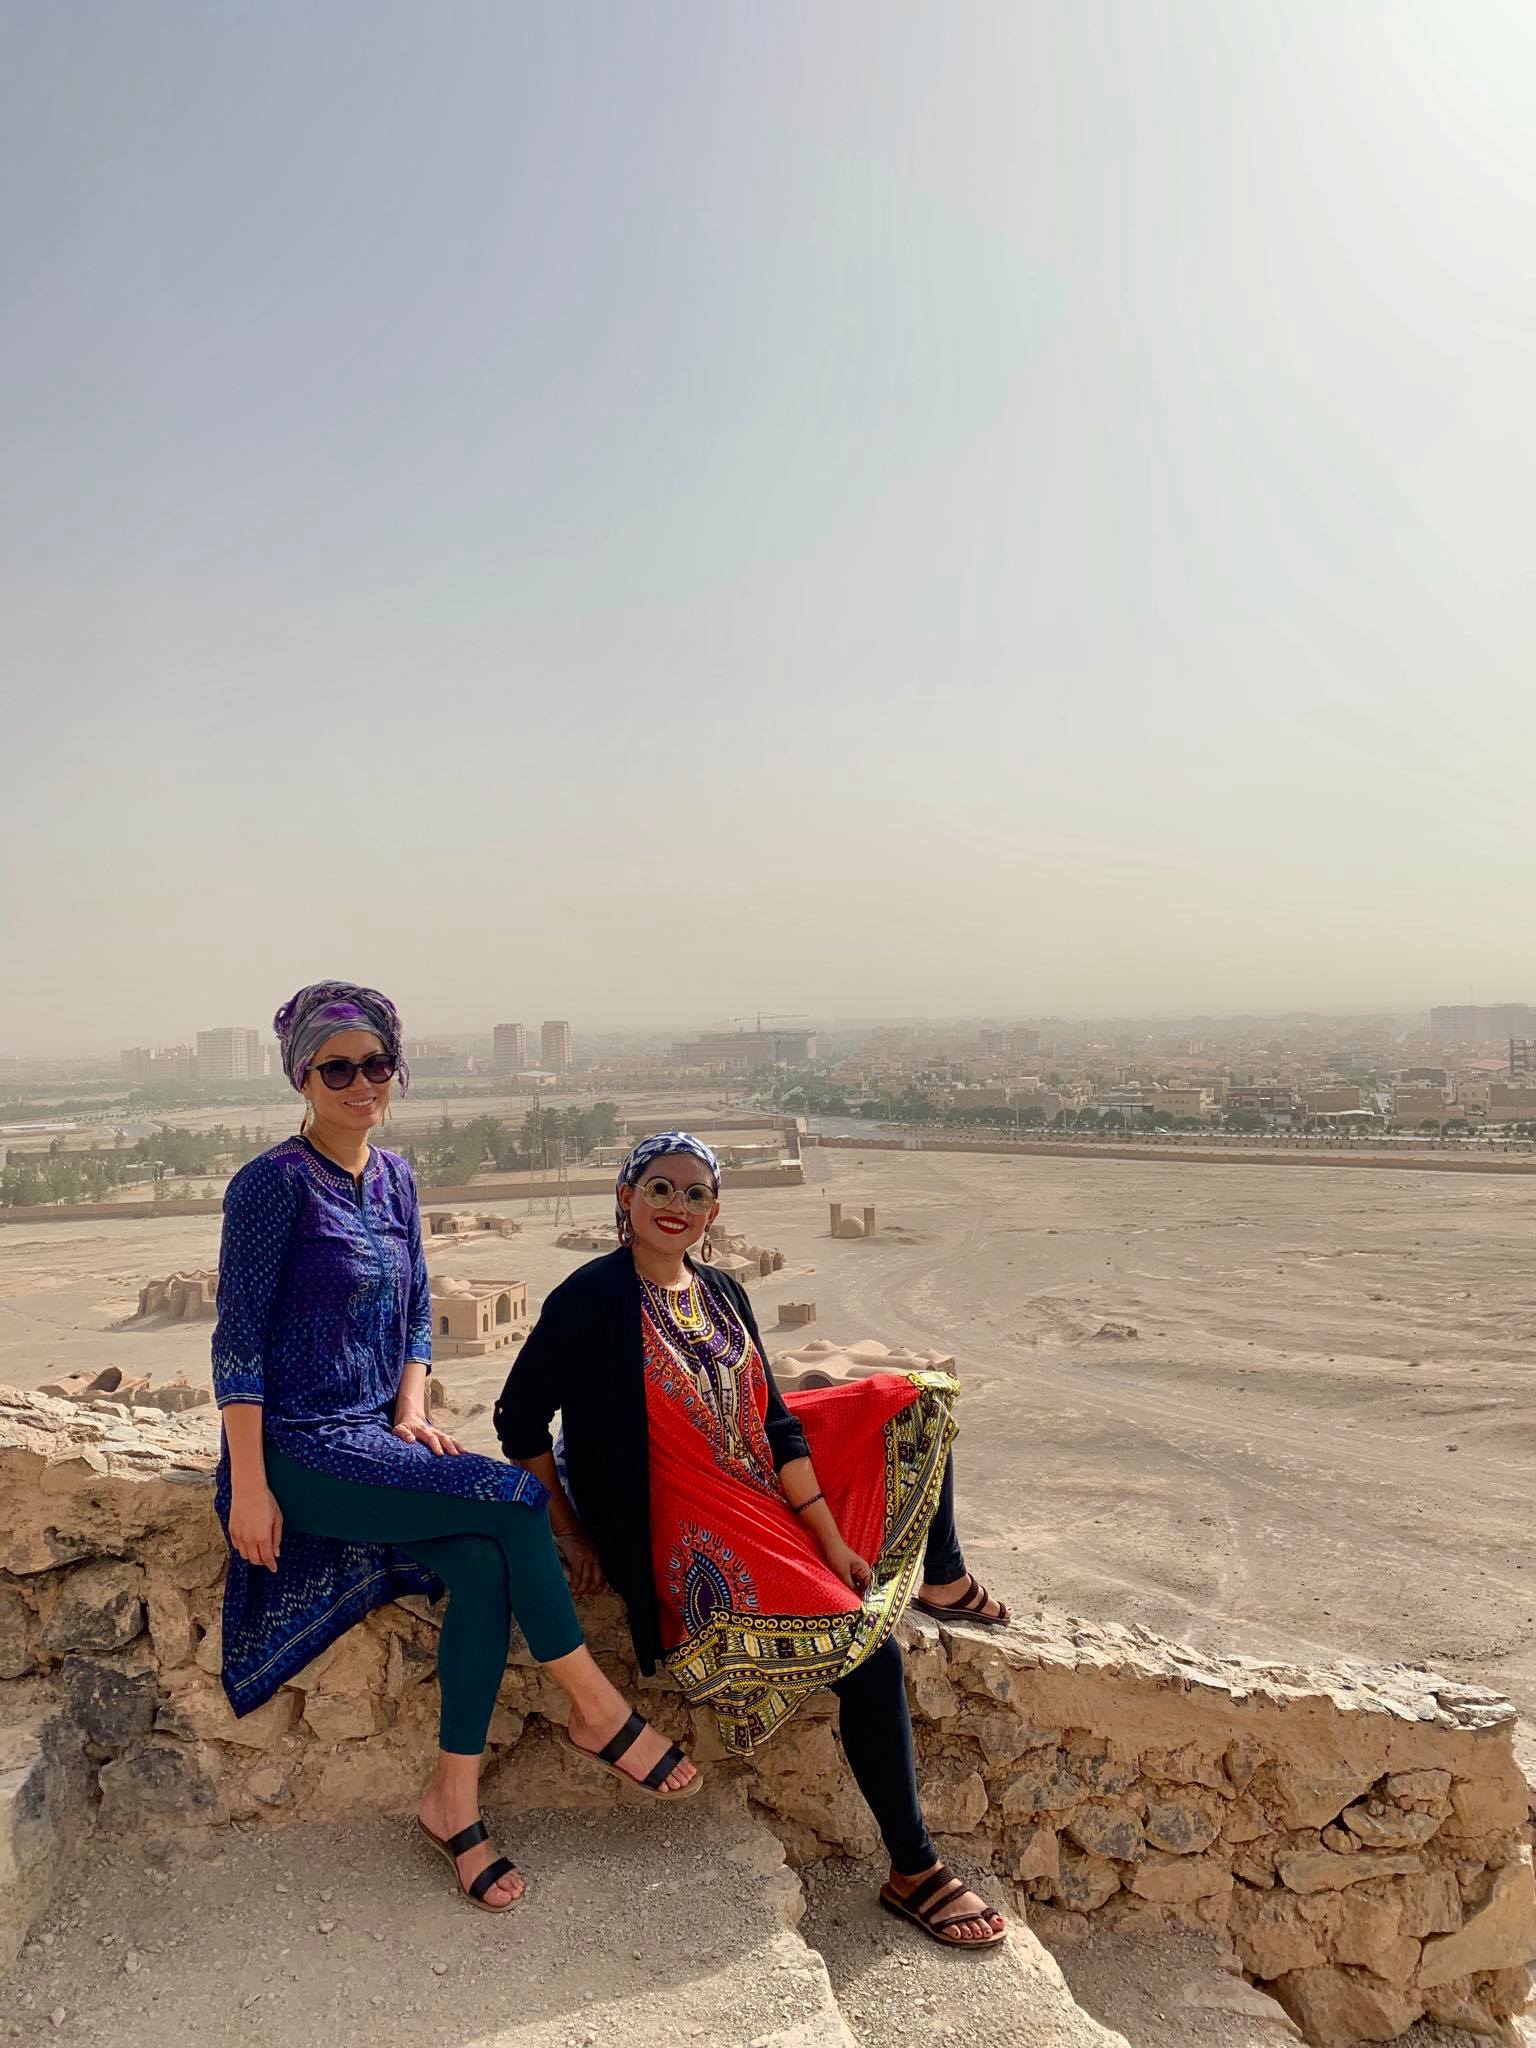 Kach Solo Travels in 2019 Pictorial today at Temple of Silence in Yazd3.jpg